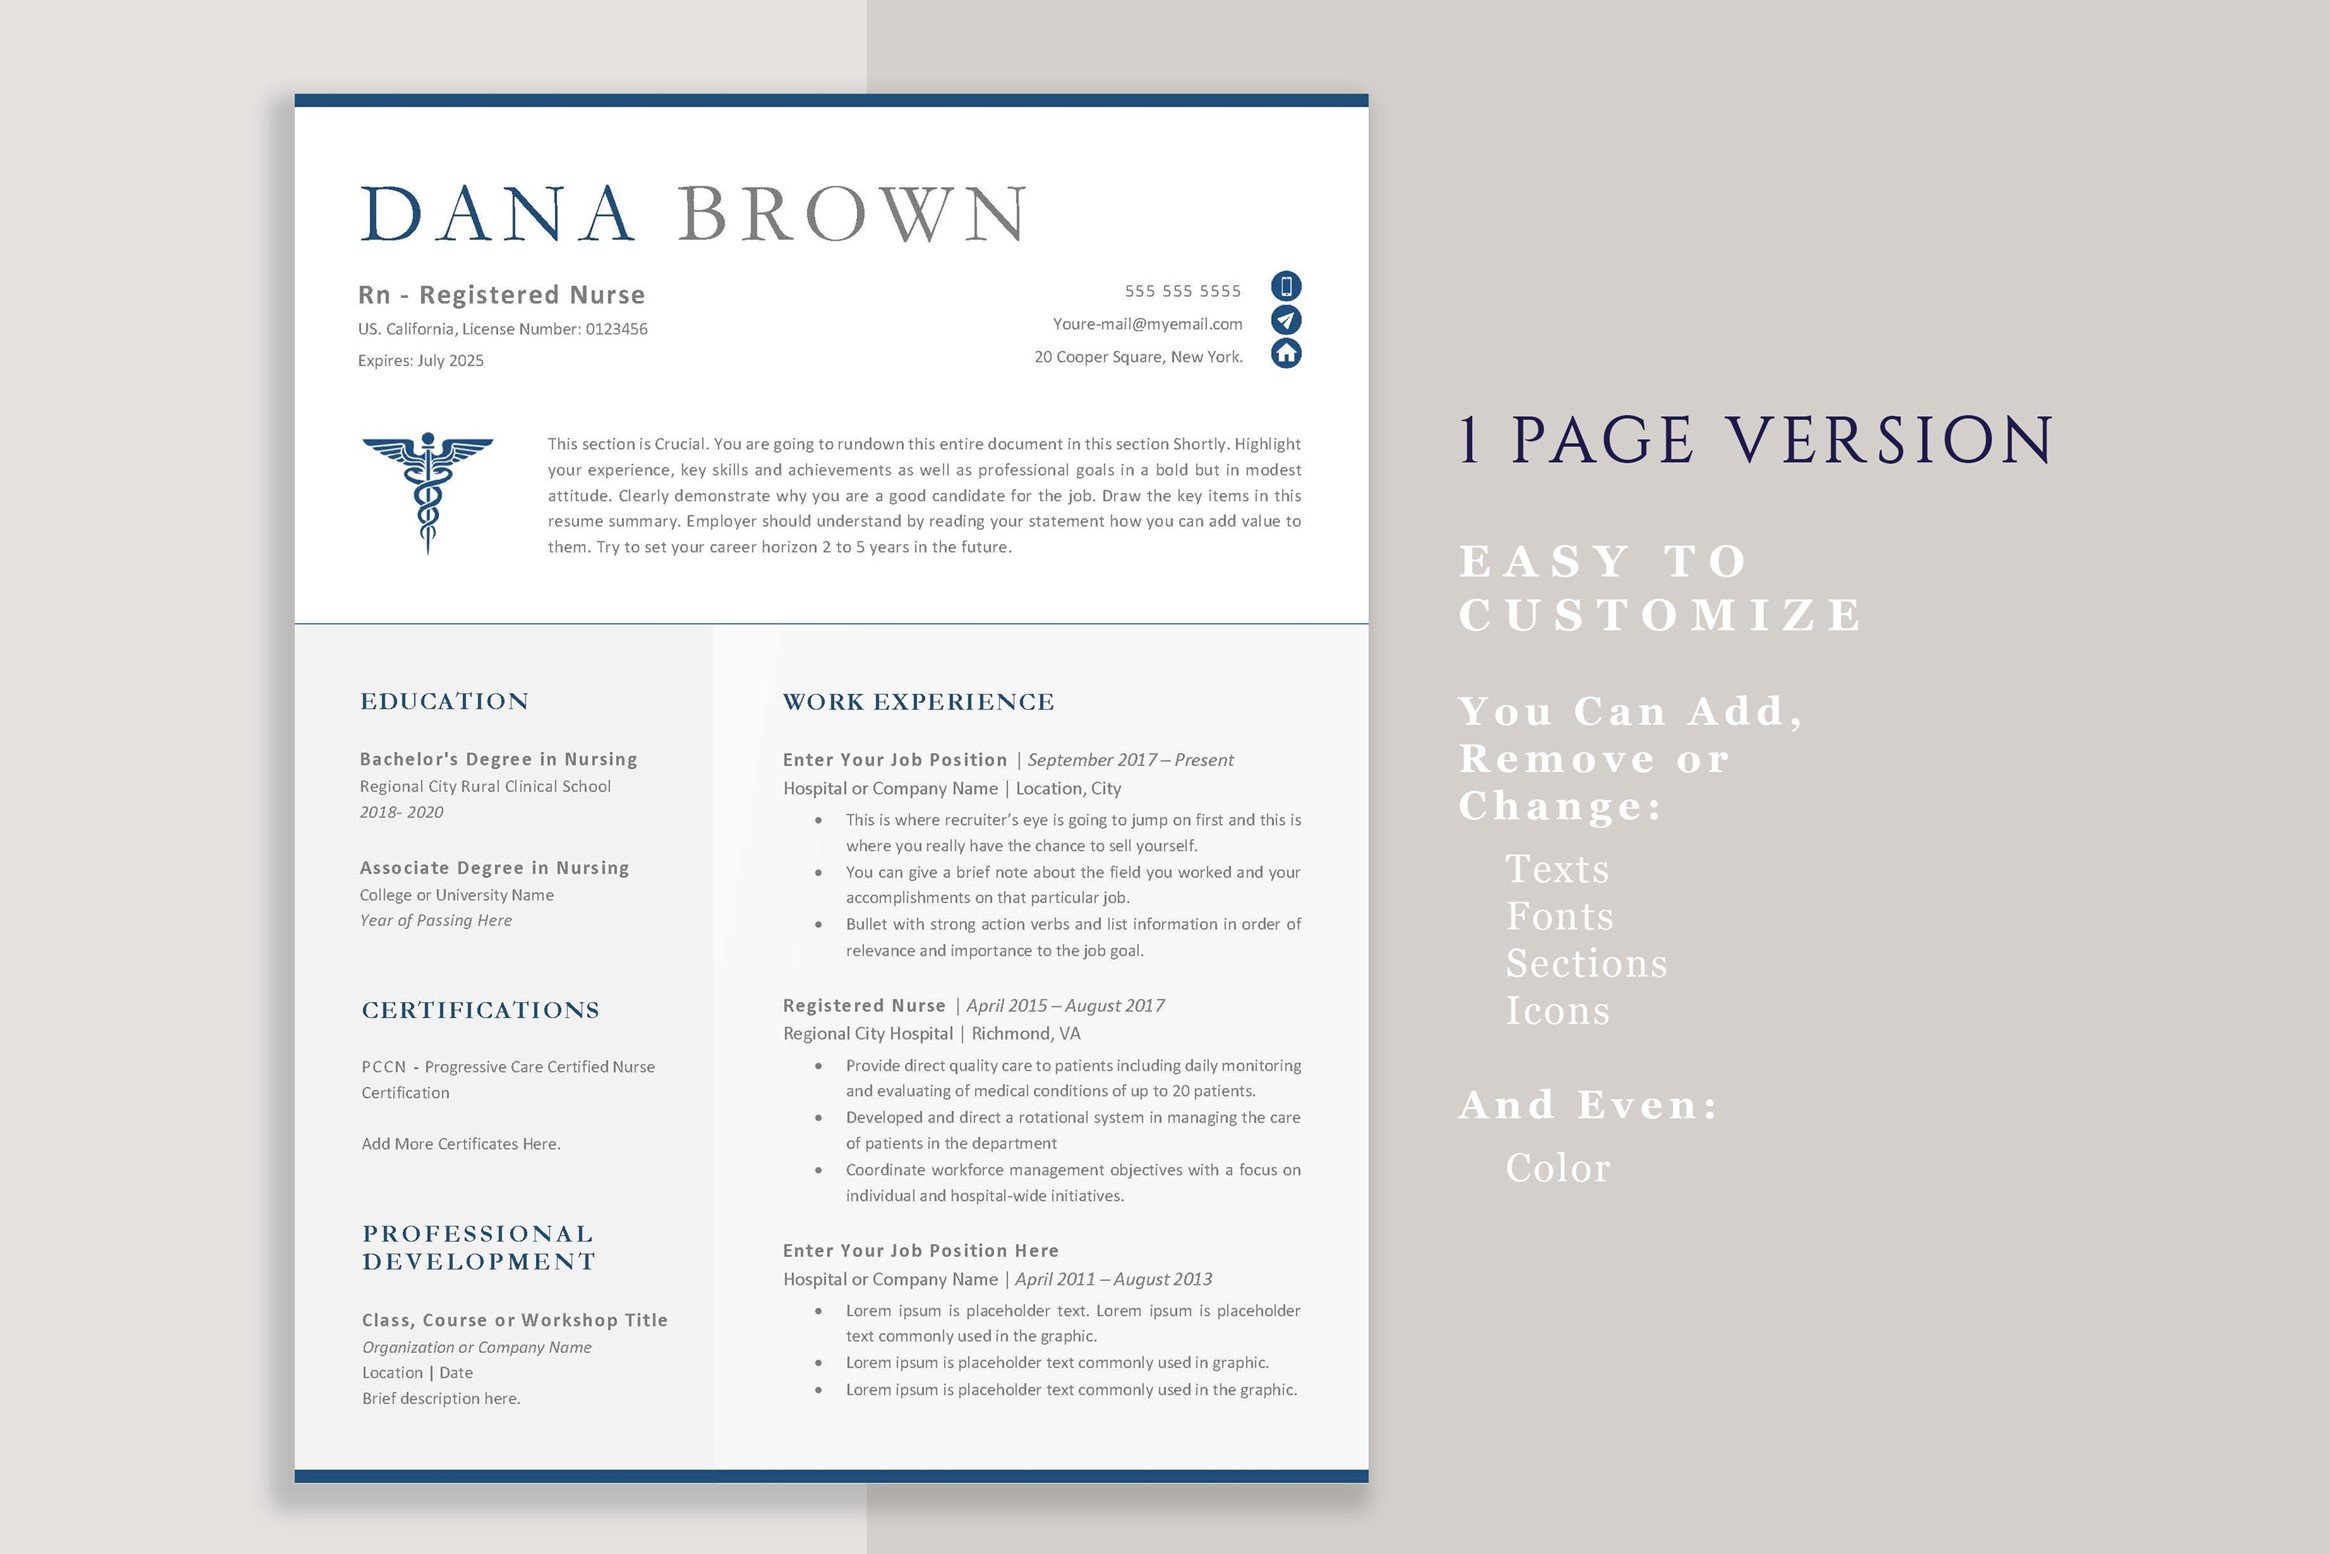 Resume template for a medical professional.